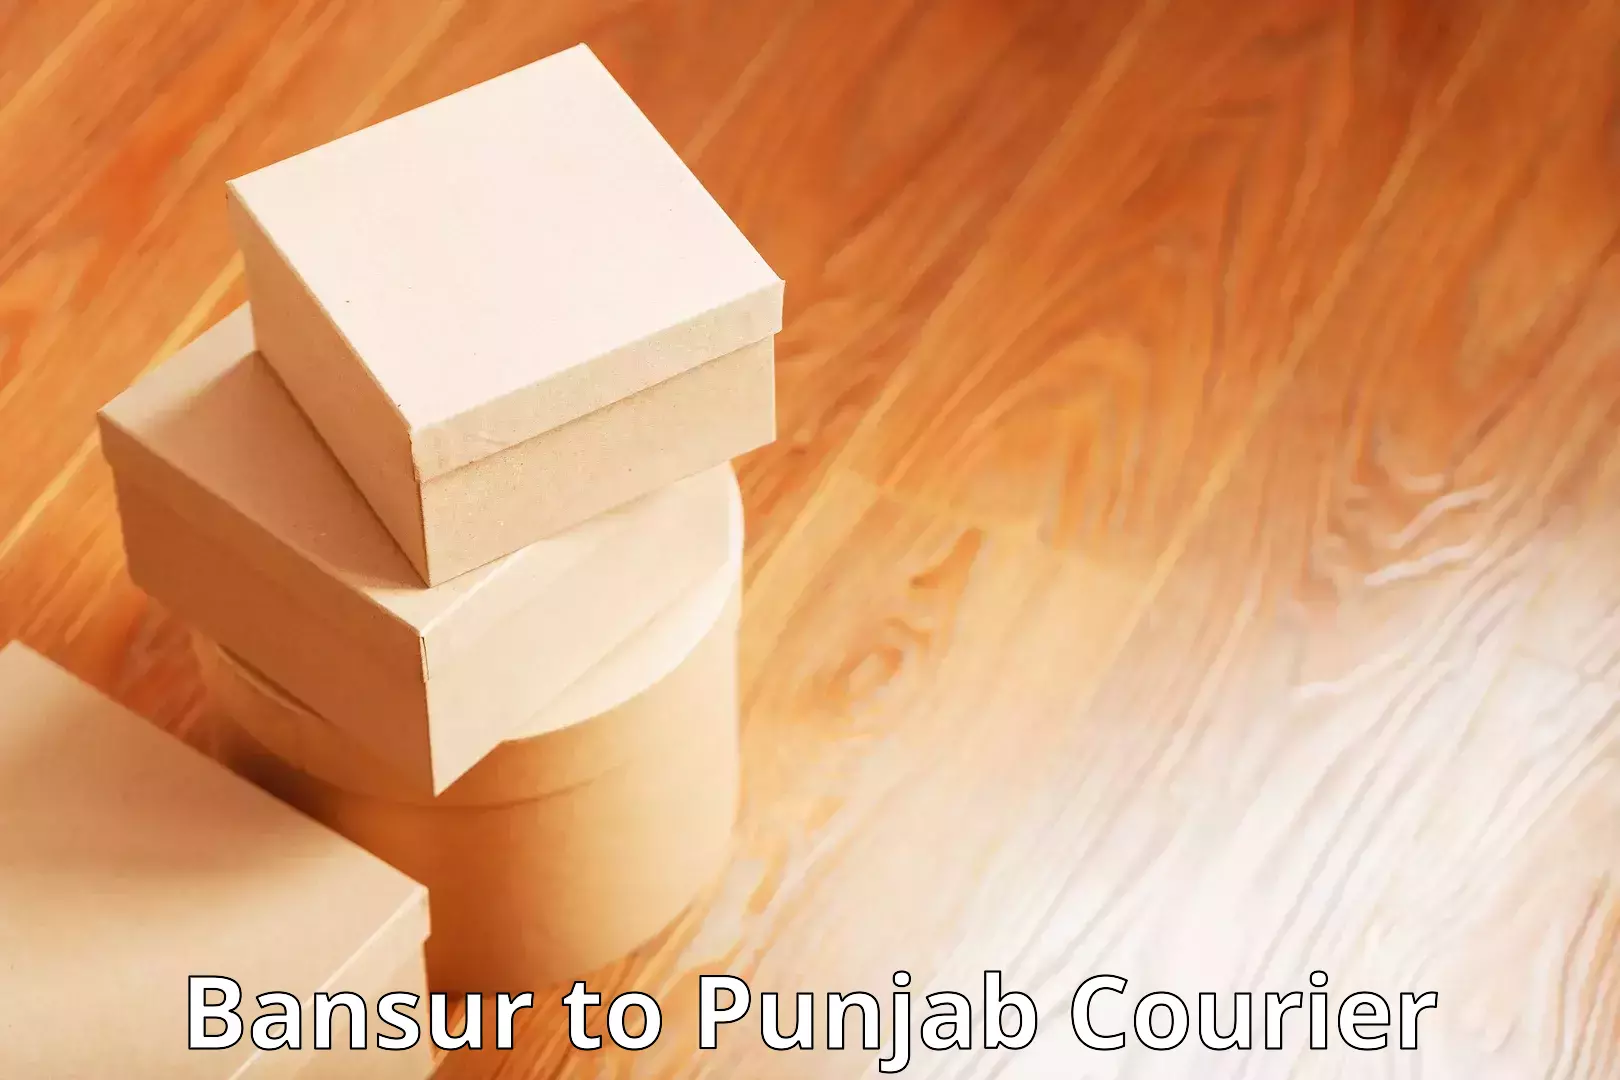 State-of-the-art courier technology Bansur to Fazilka